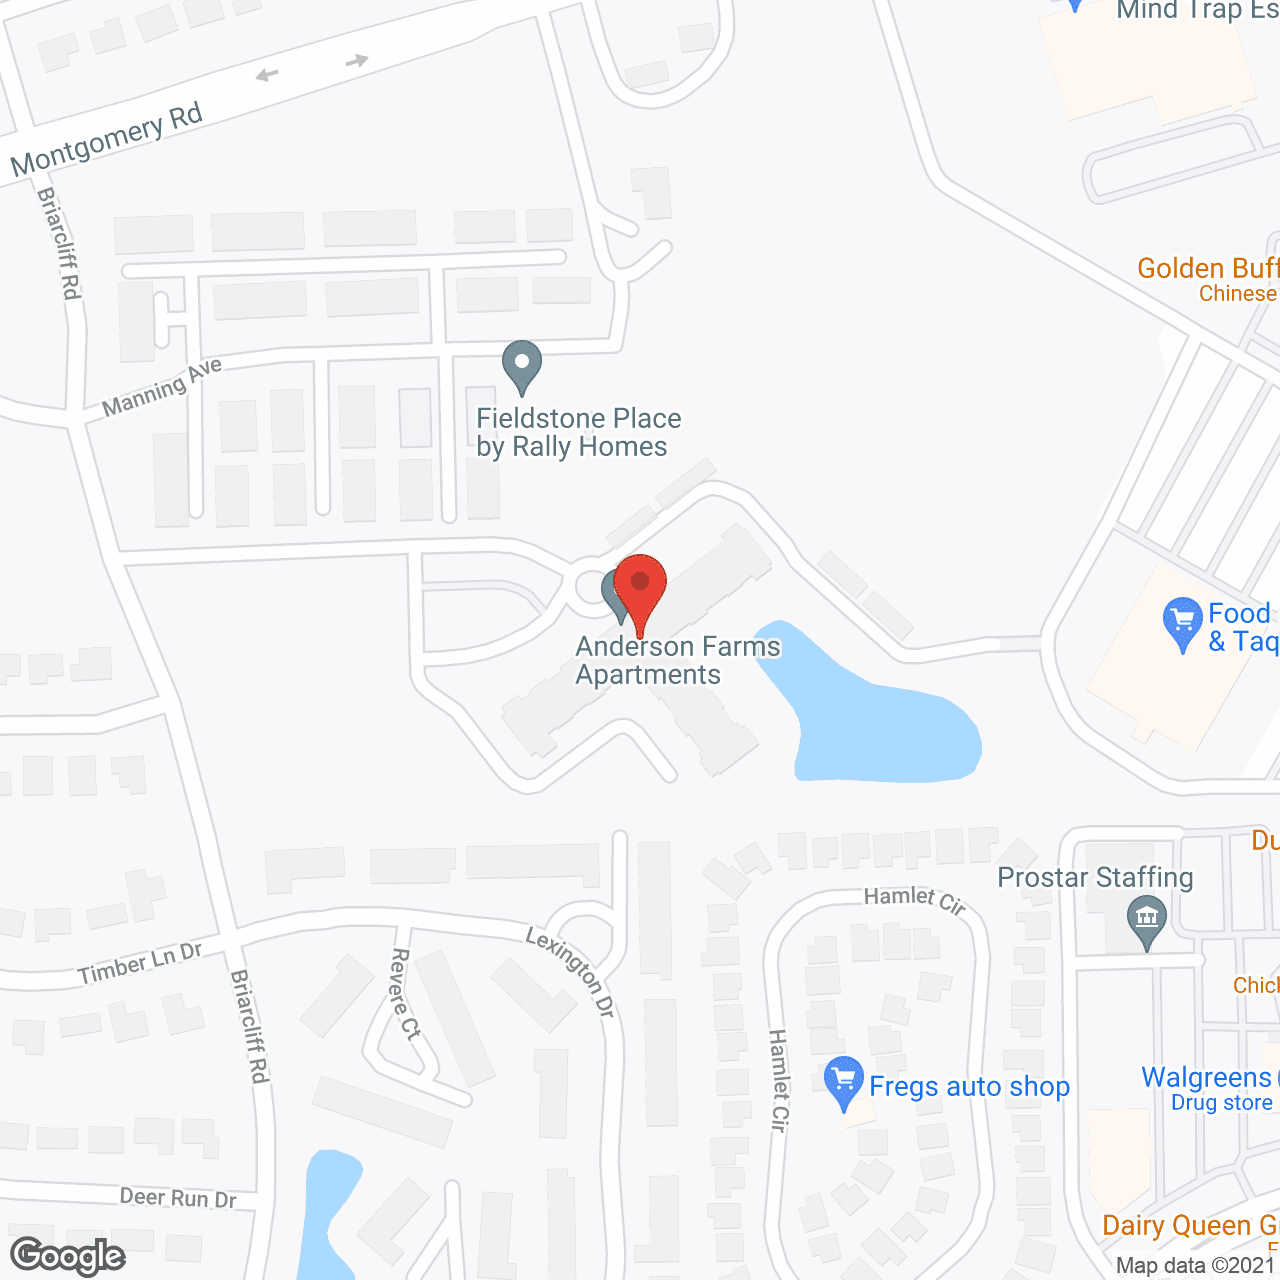 Anderson Farms Apartments in google map